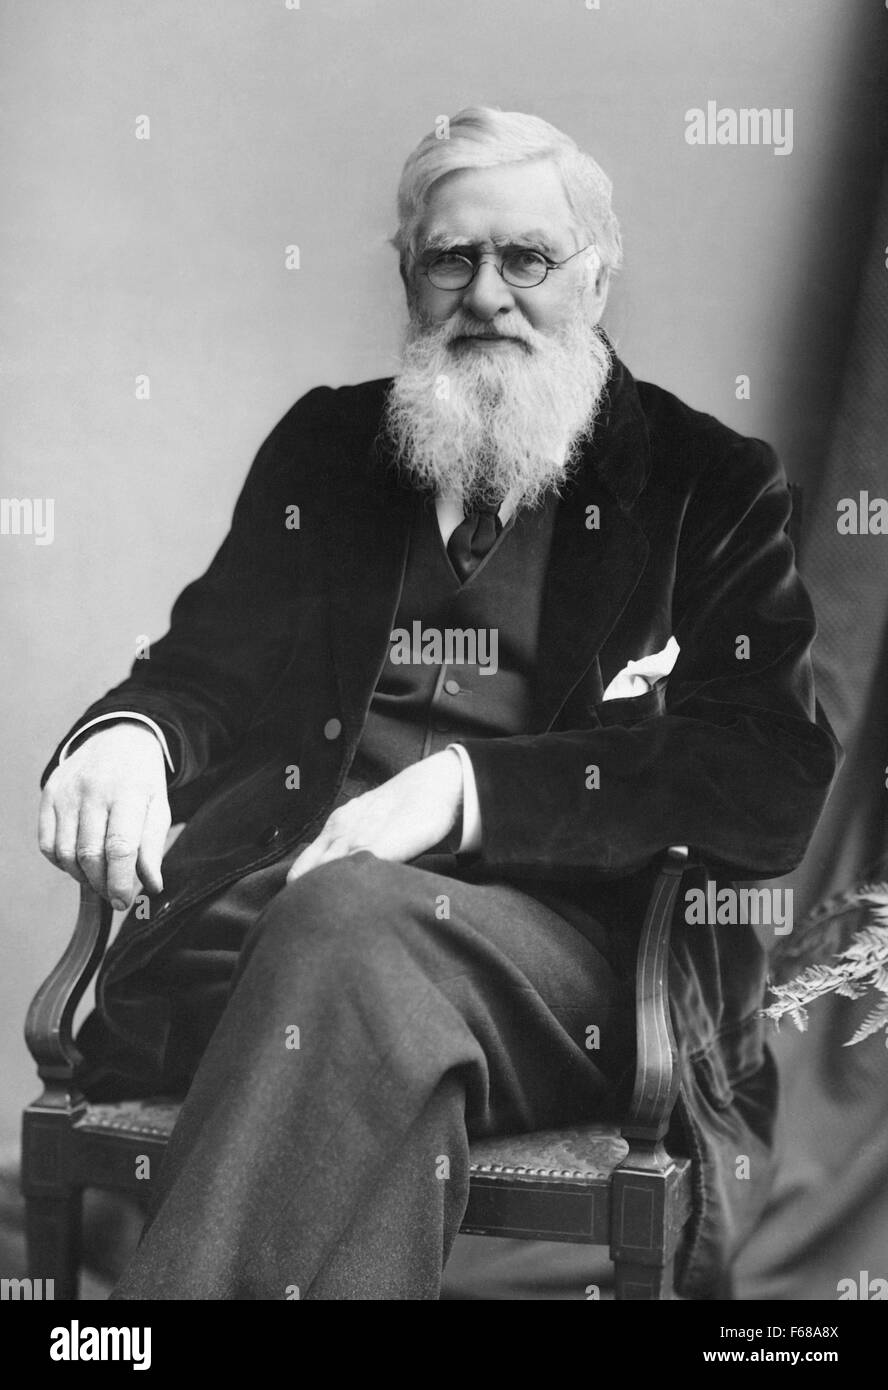 Alfred Russel Wallace (1823 - 1913), a British naturalist, biologist, geographer, and explorer (shown c1895) is best known for independently conceiving the theory of evolution through natural selection. Wallace's paper on the subject was jointly published with some of Charles Darwin's writings in 1858. Stock Photo